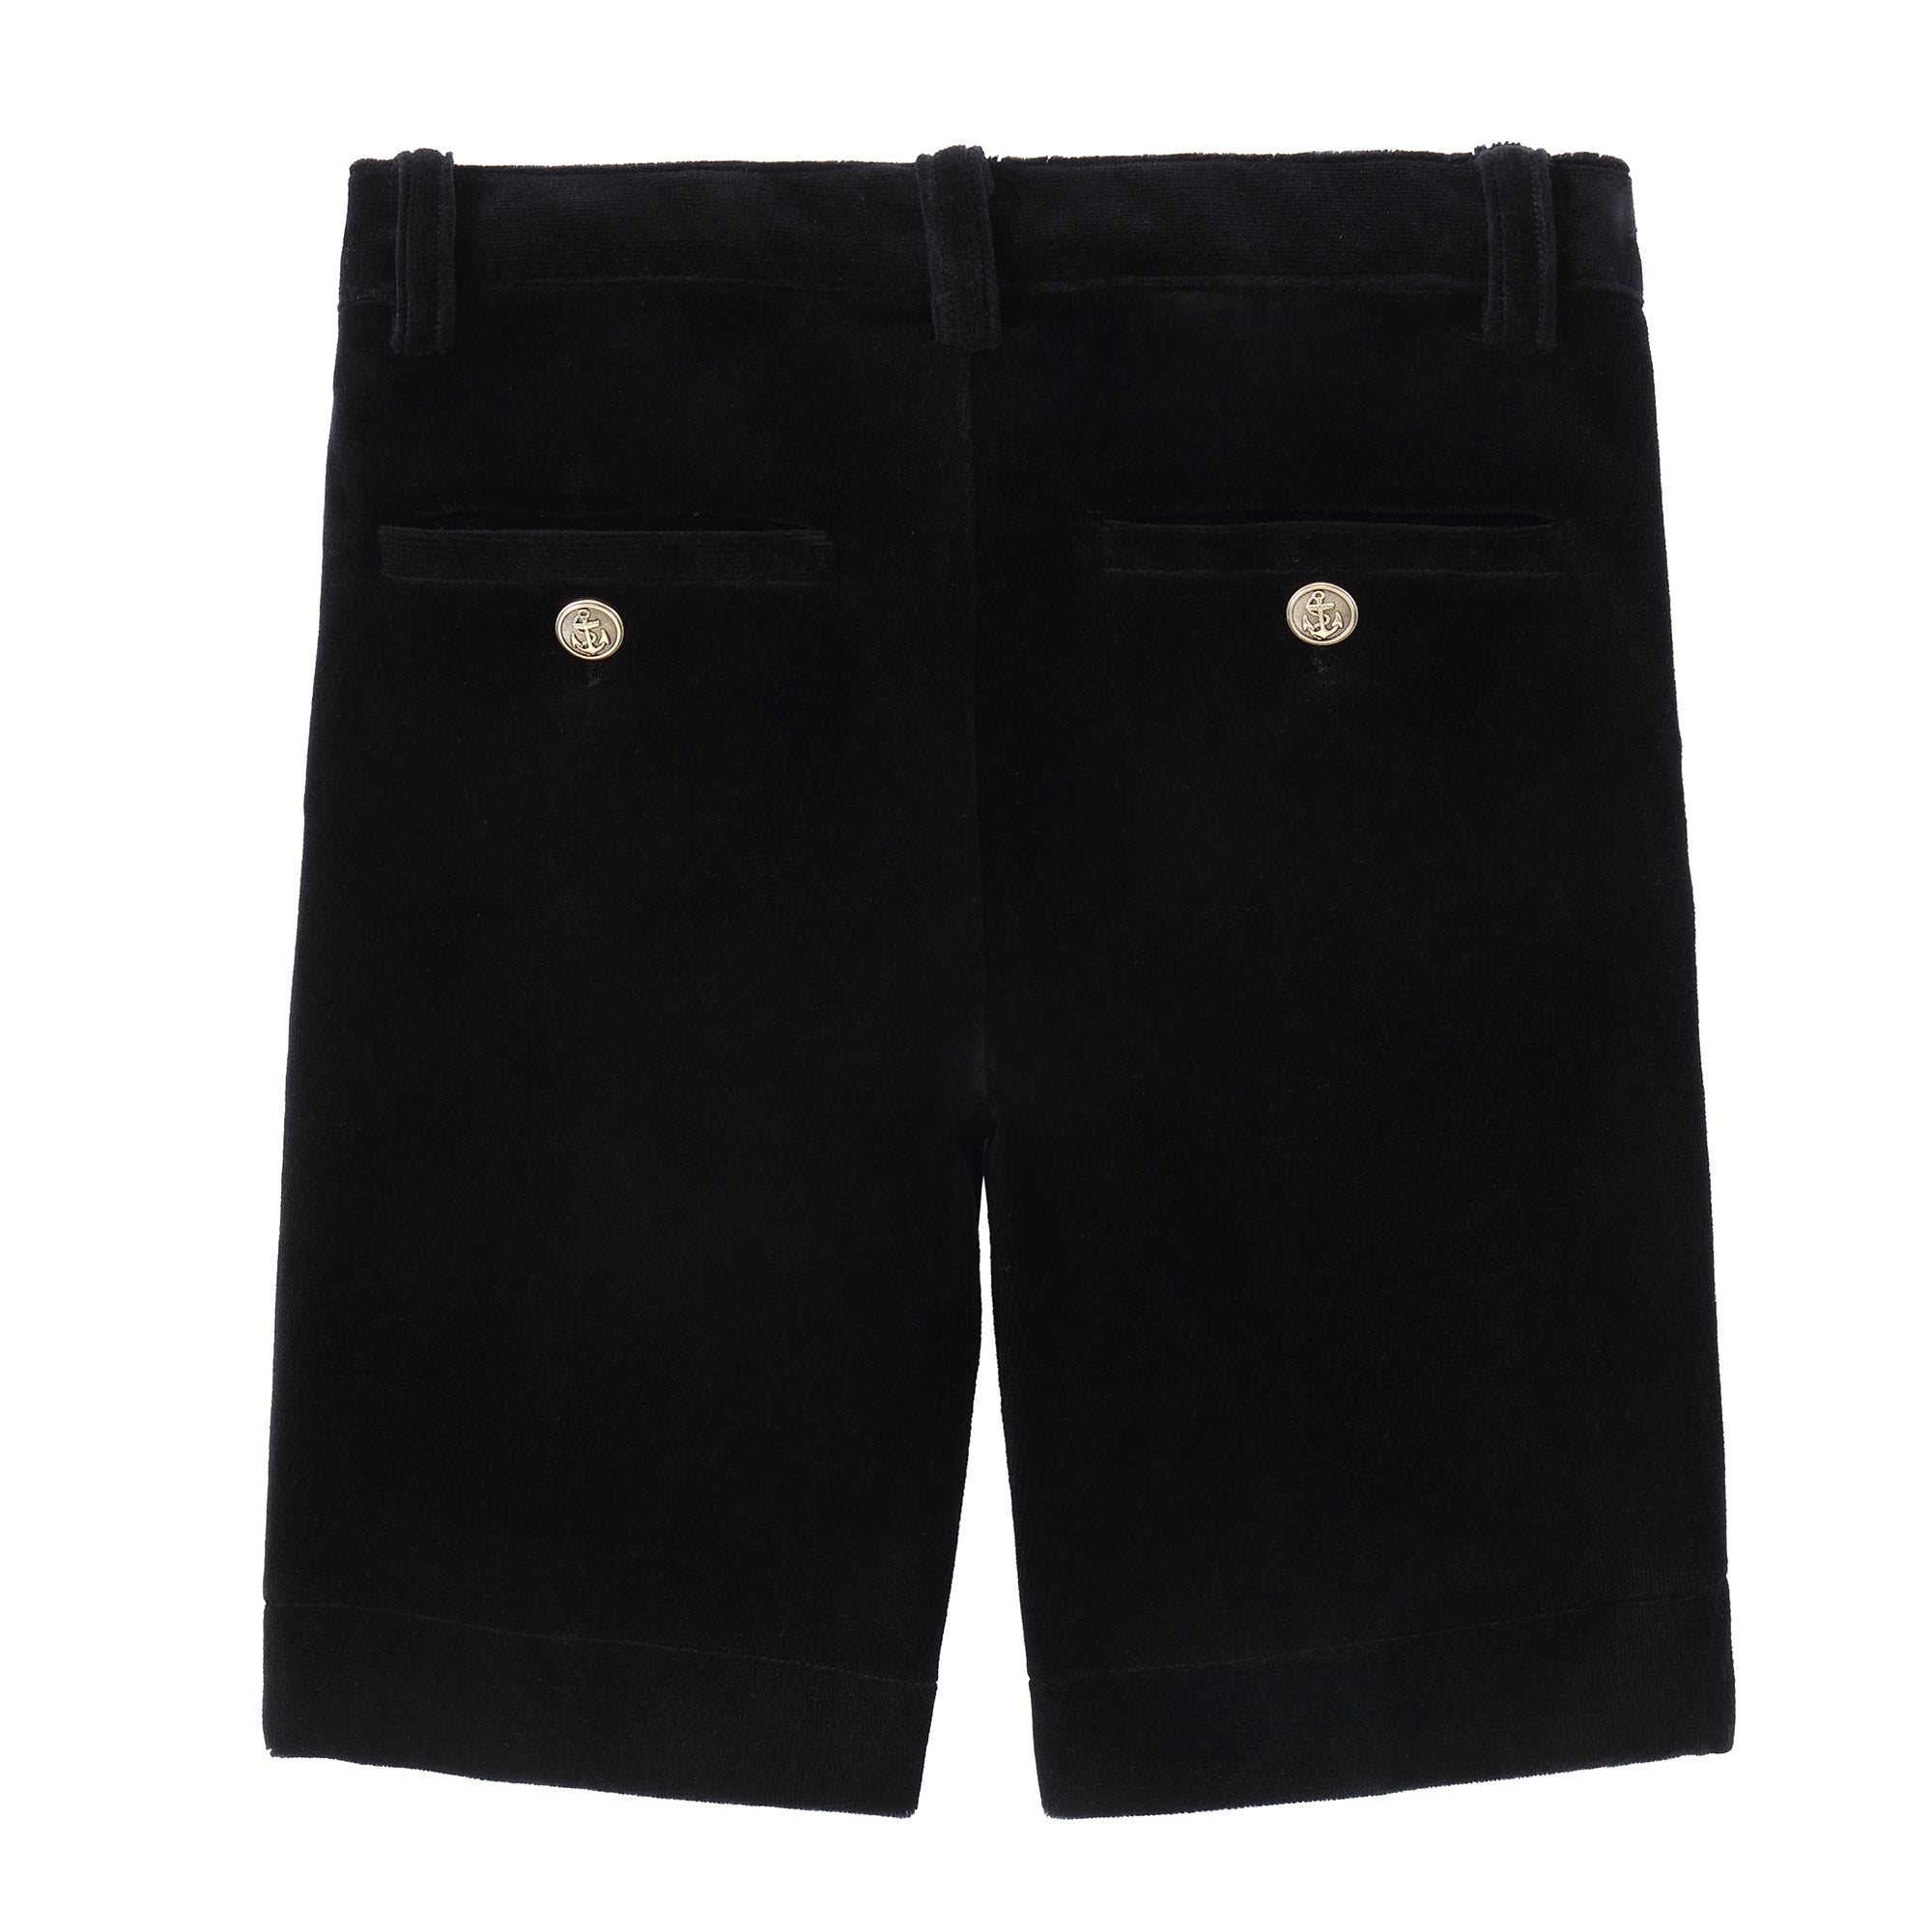 Black Velvet Shorts With Gold Buttons